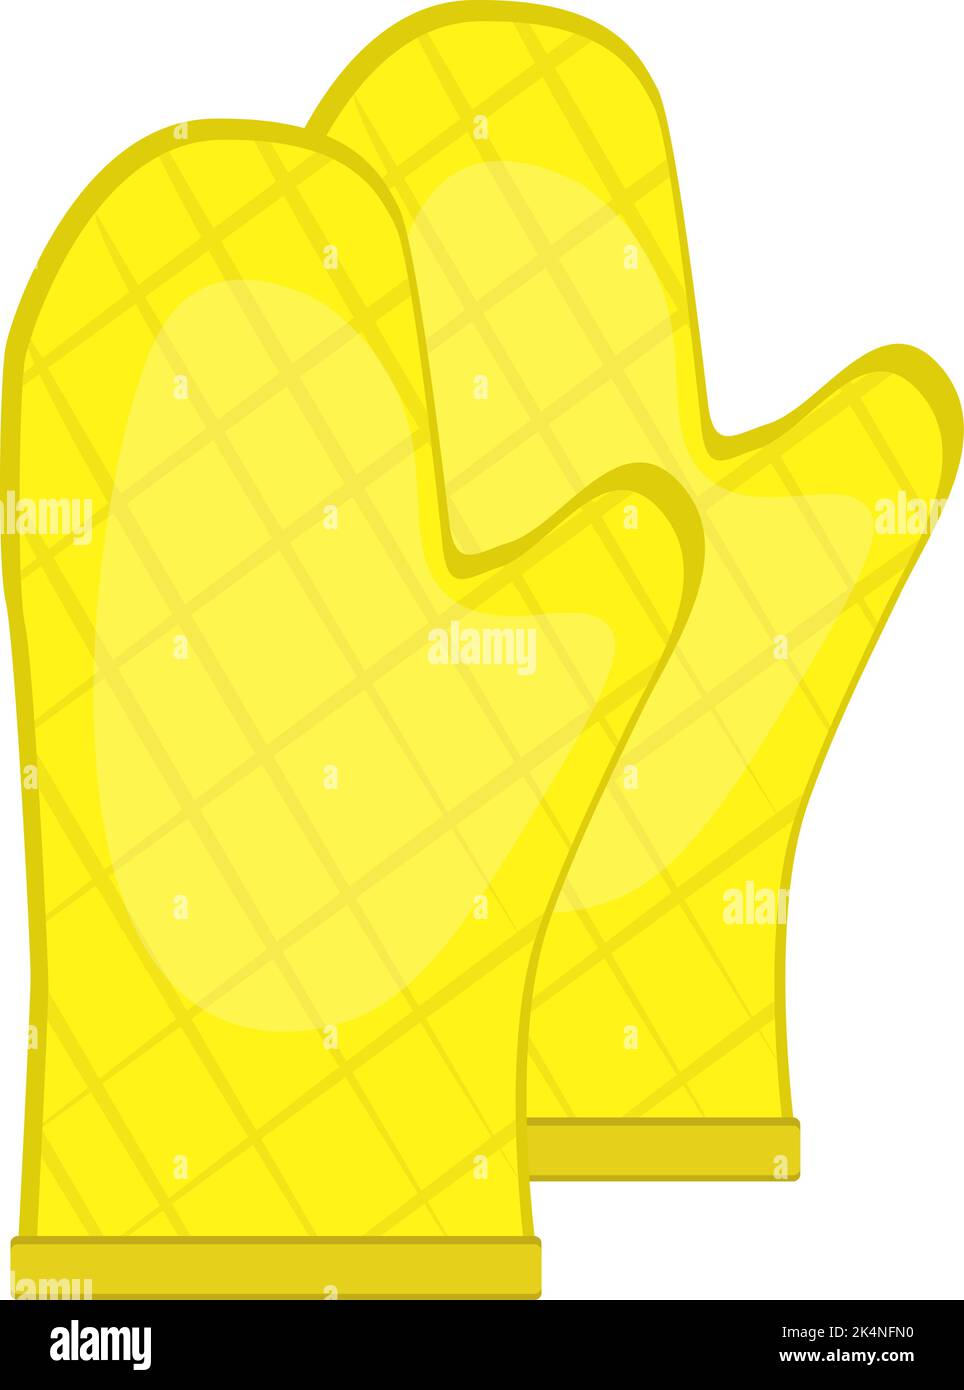 https://c8.alamy.com/comp/2K4NFN0/yellow-oven-mittens-illustration-vector-on-a-white-background-2K4NFN0.jpg